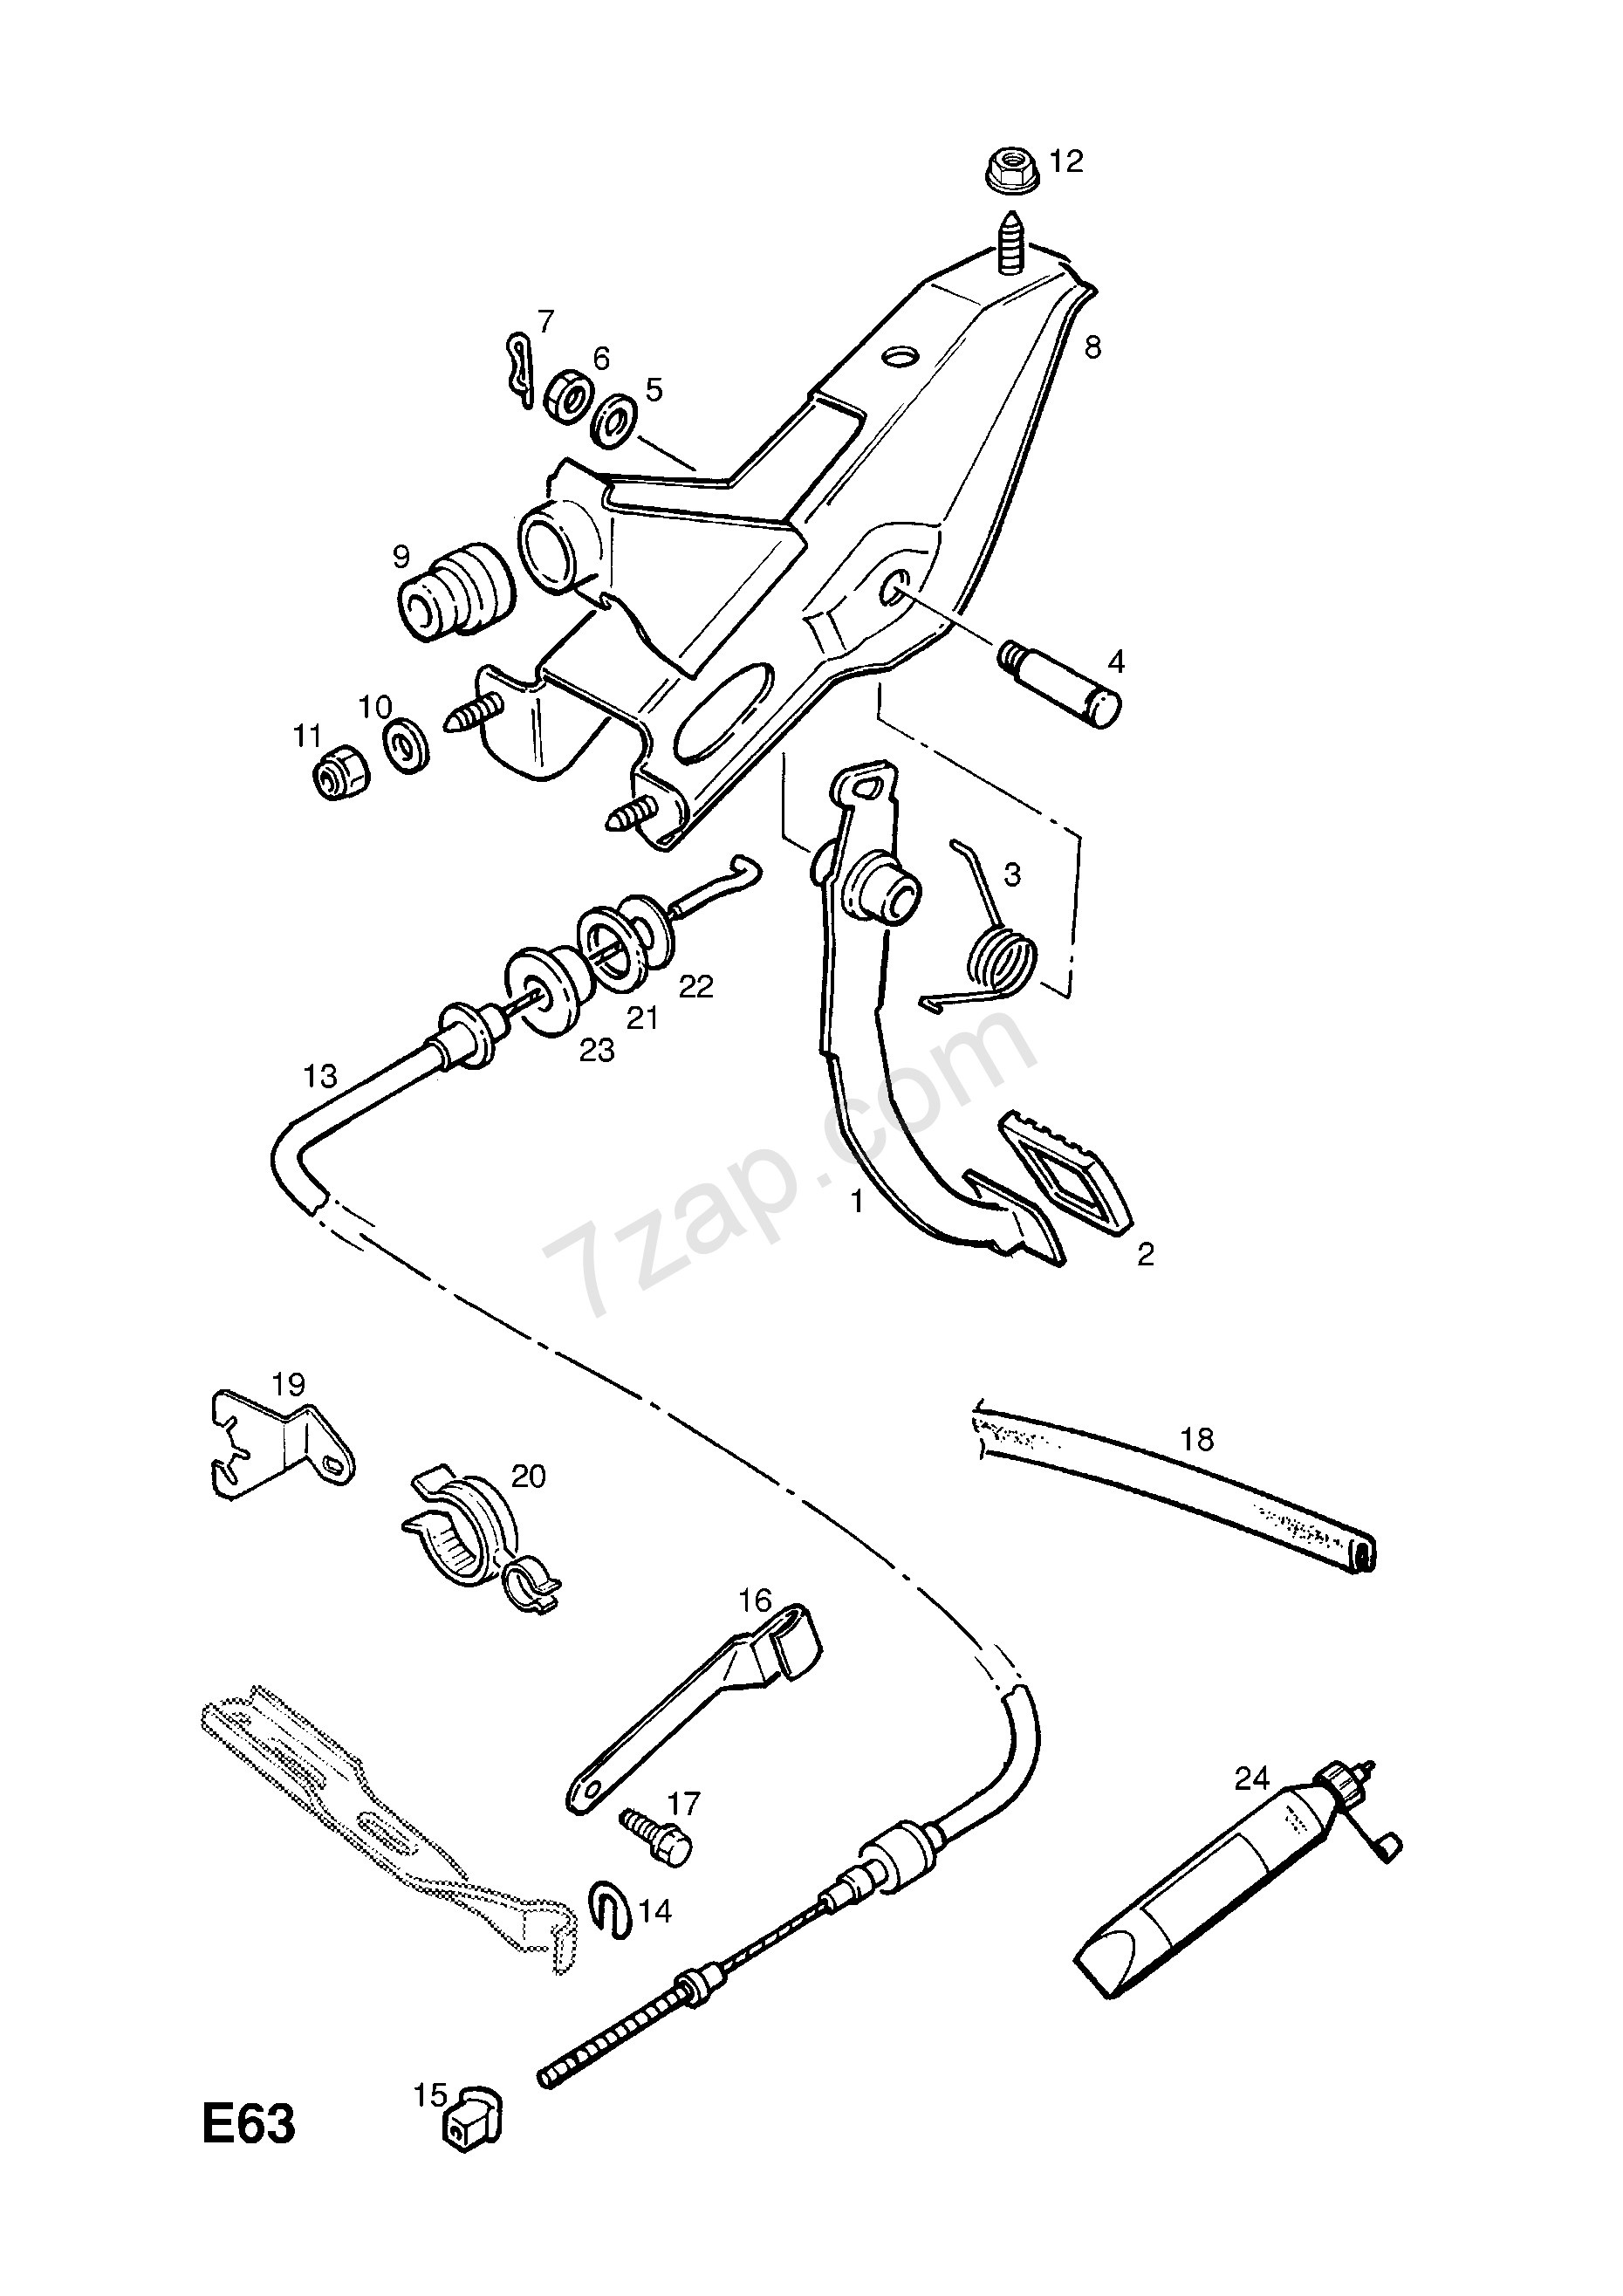 Clutch Diagram for A Manual Transmission Clutch Pedal and Fixings Contd [used with Manual Transmission Rhd Of Clutch Diagram for A Manual Transmission